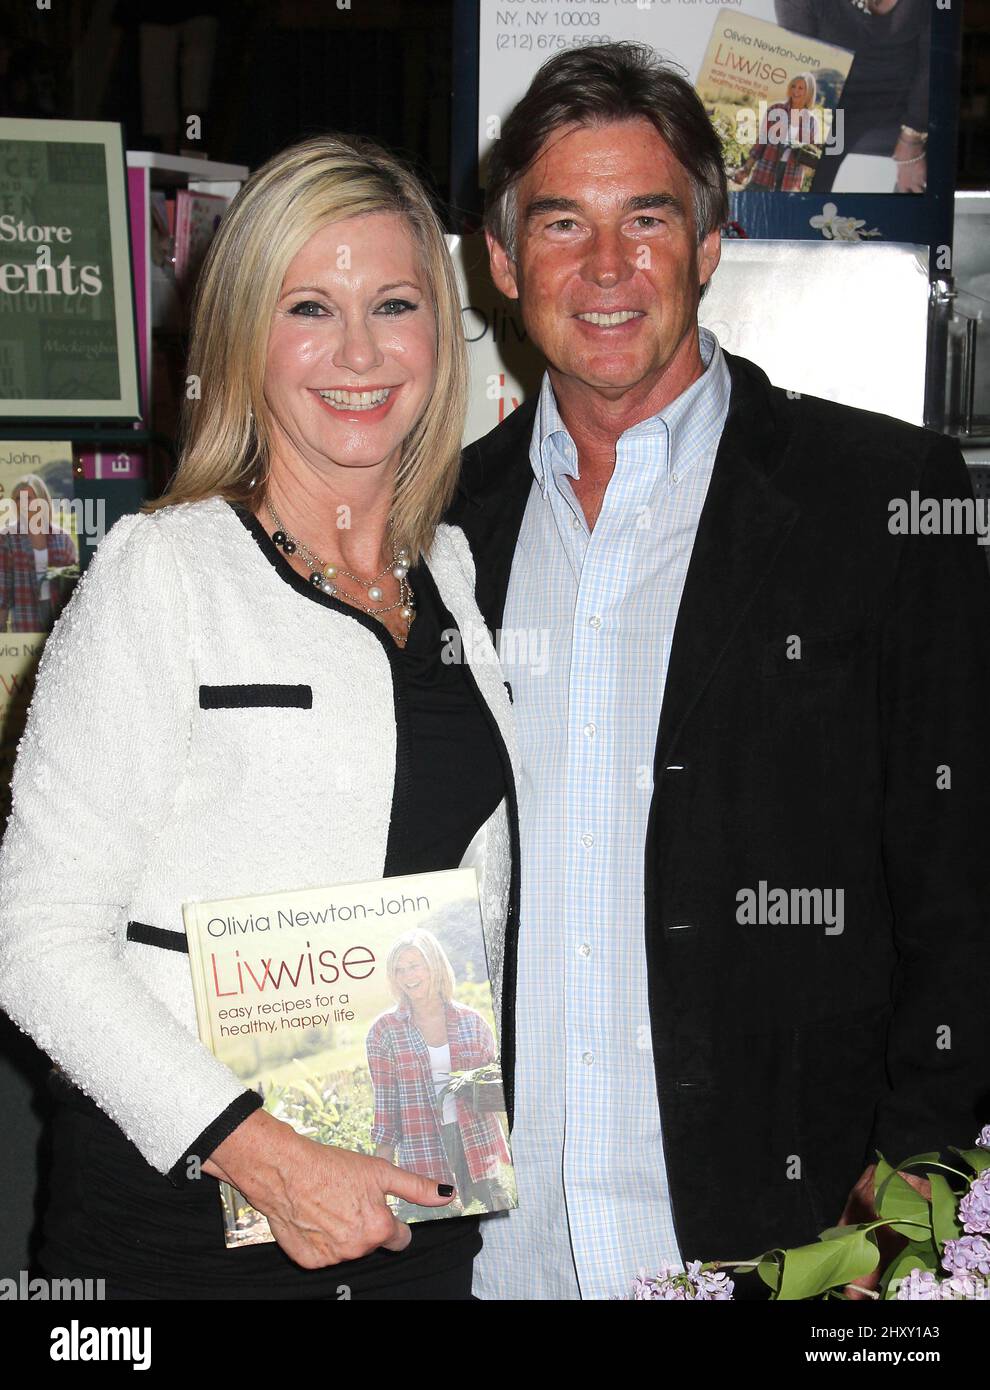 Olivia Newton-John and John Easterling during the 'Livwise' book signing held at Barnes & Noble in New York Stock Photo